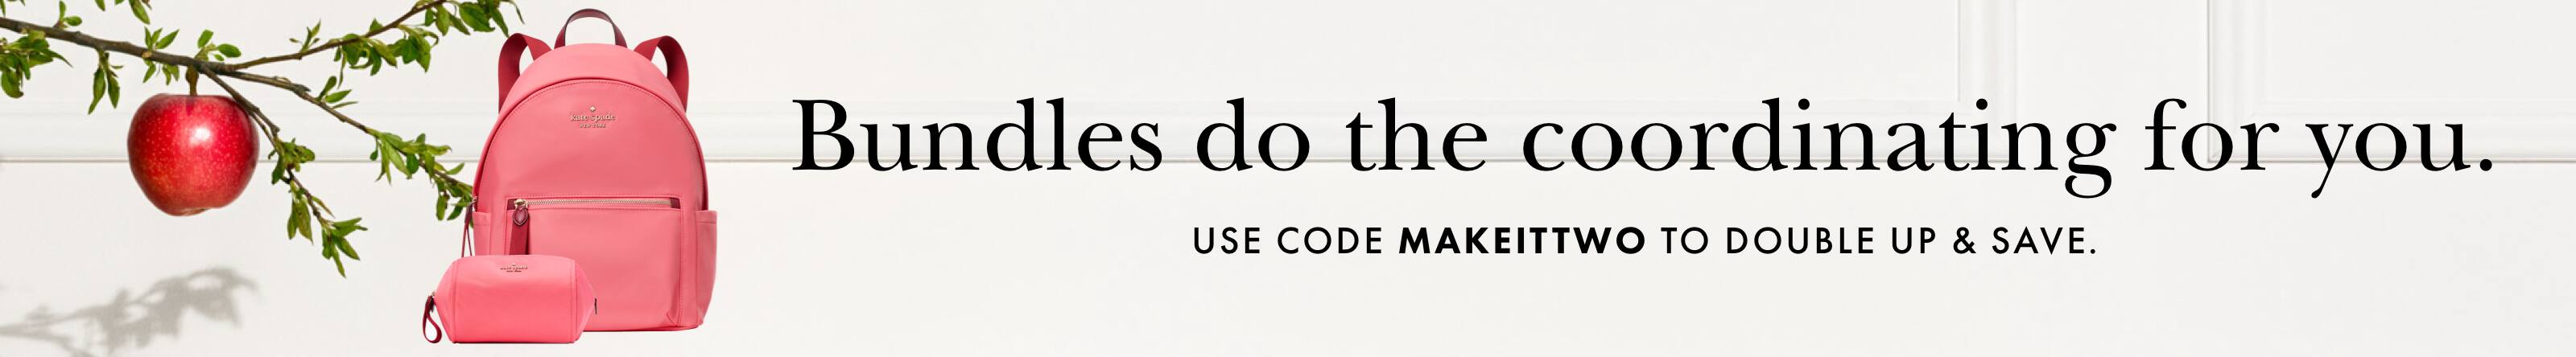 We did the coordinating for you. Use code MAKEITTWO.